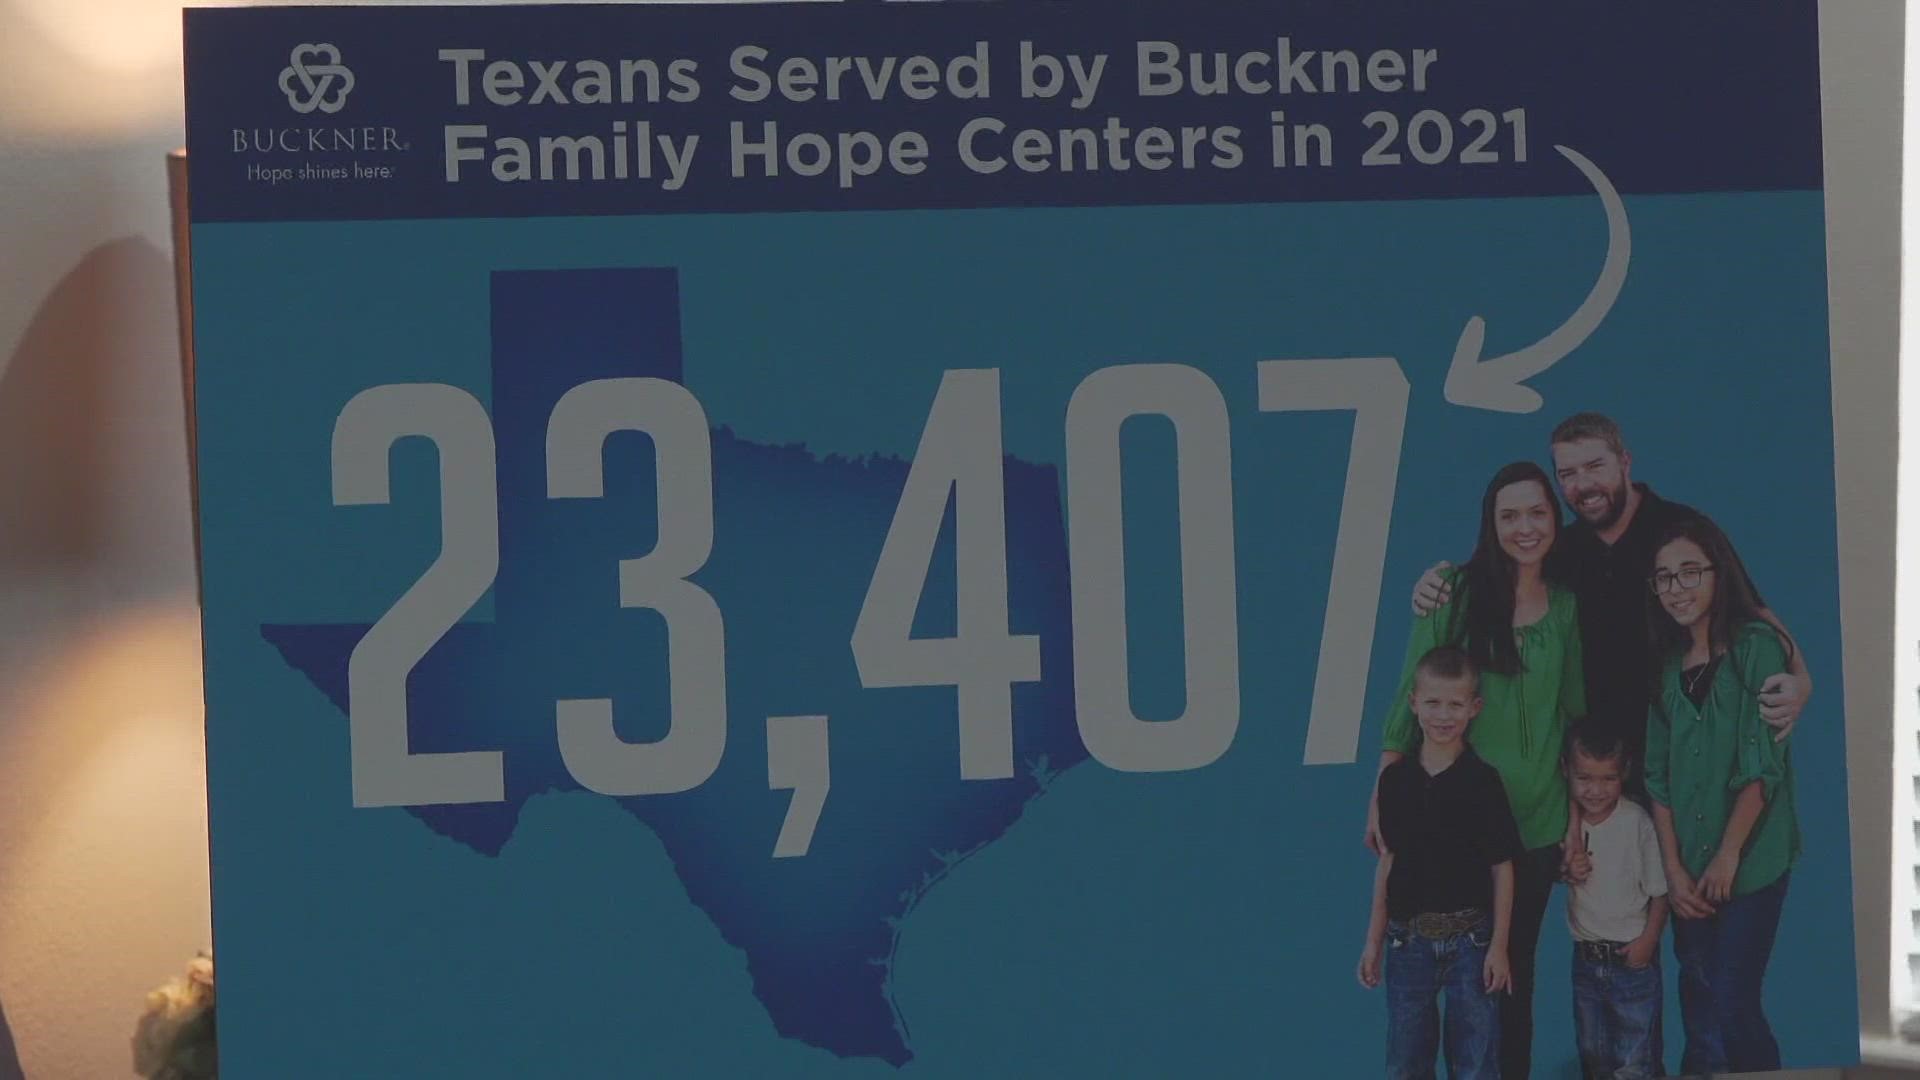 Buckner West Texas helps place foster kids, helps kids get adopted and offers housing for single mothers.